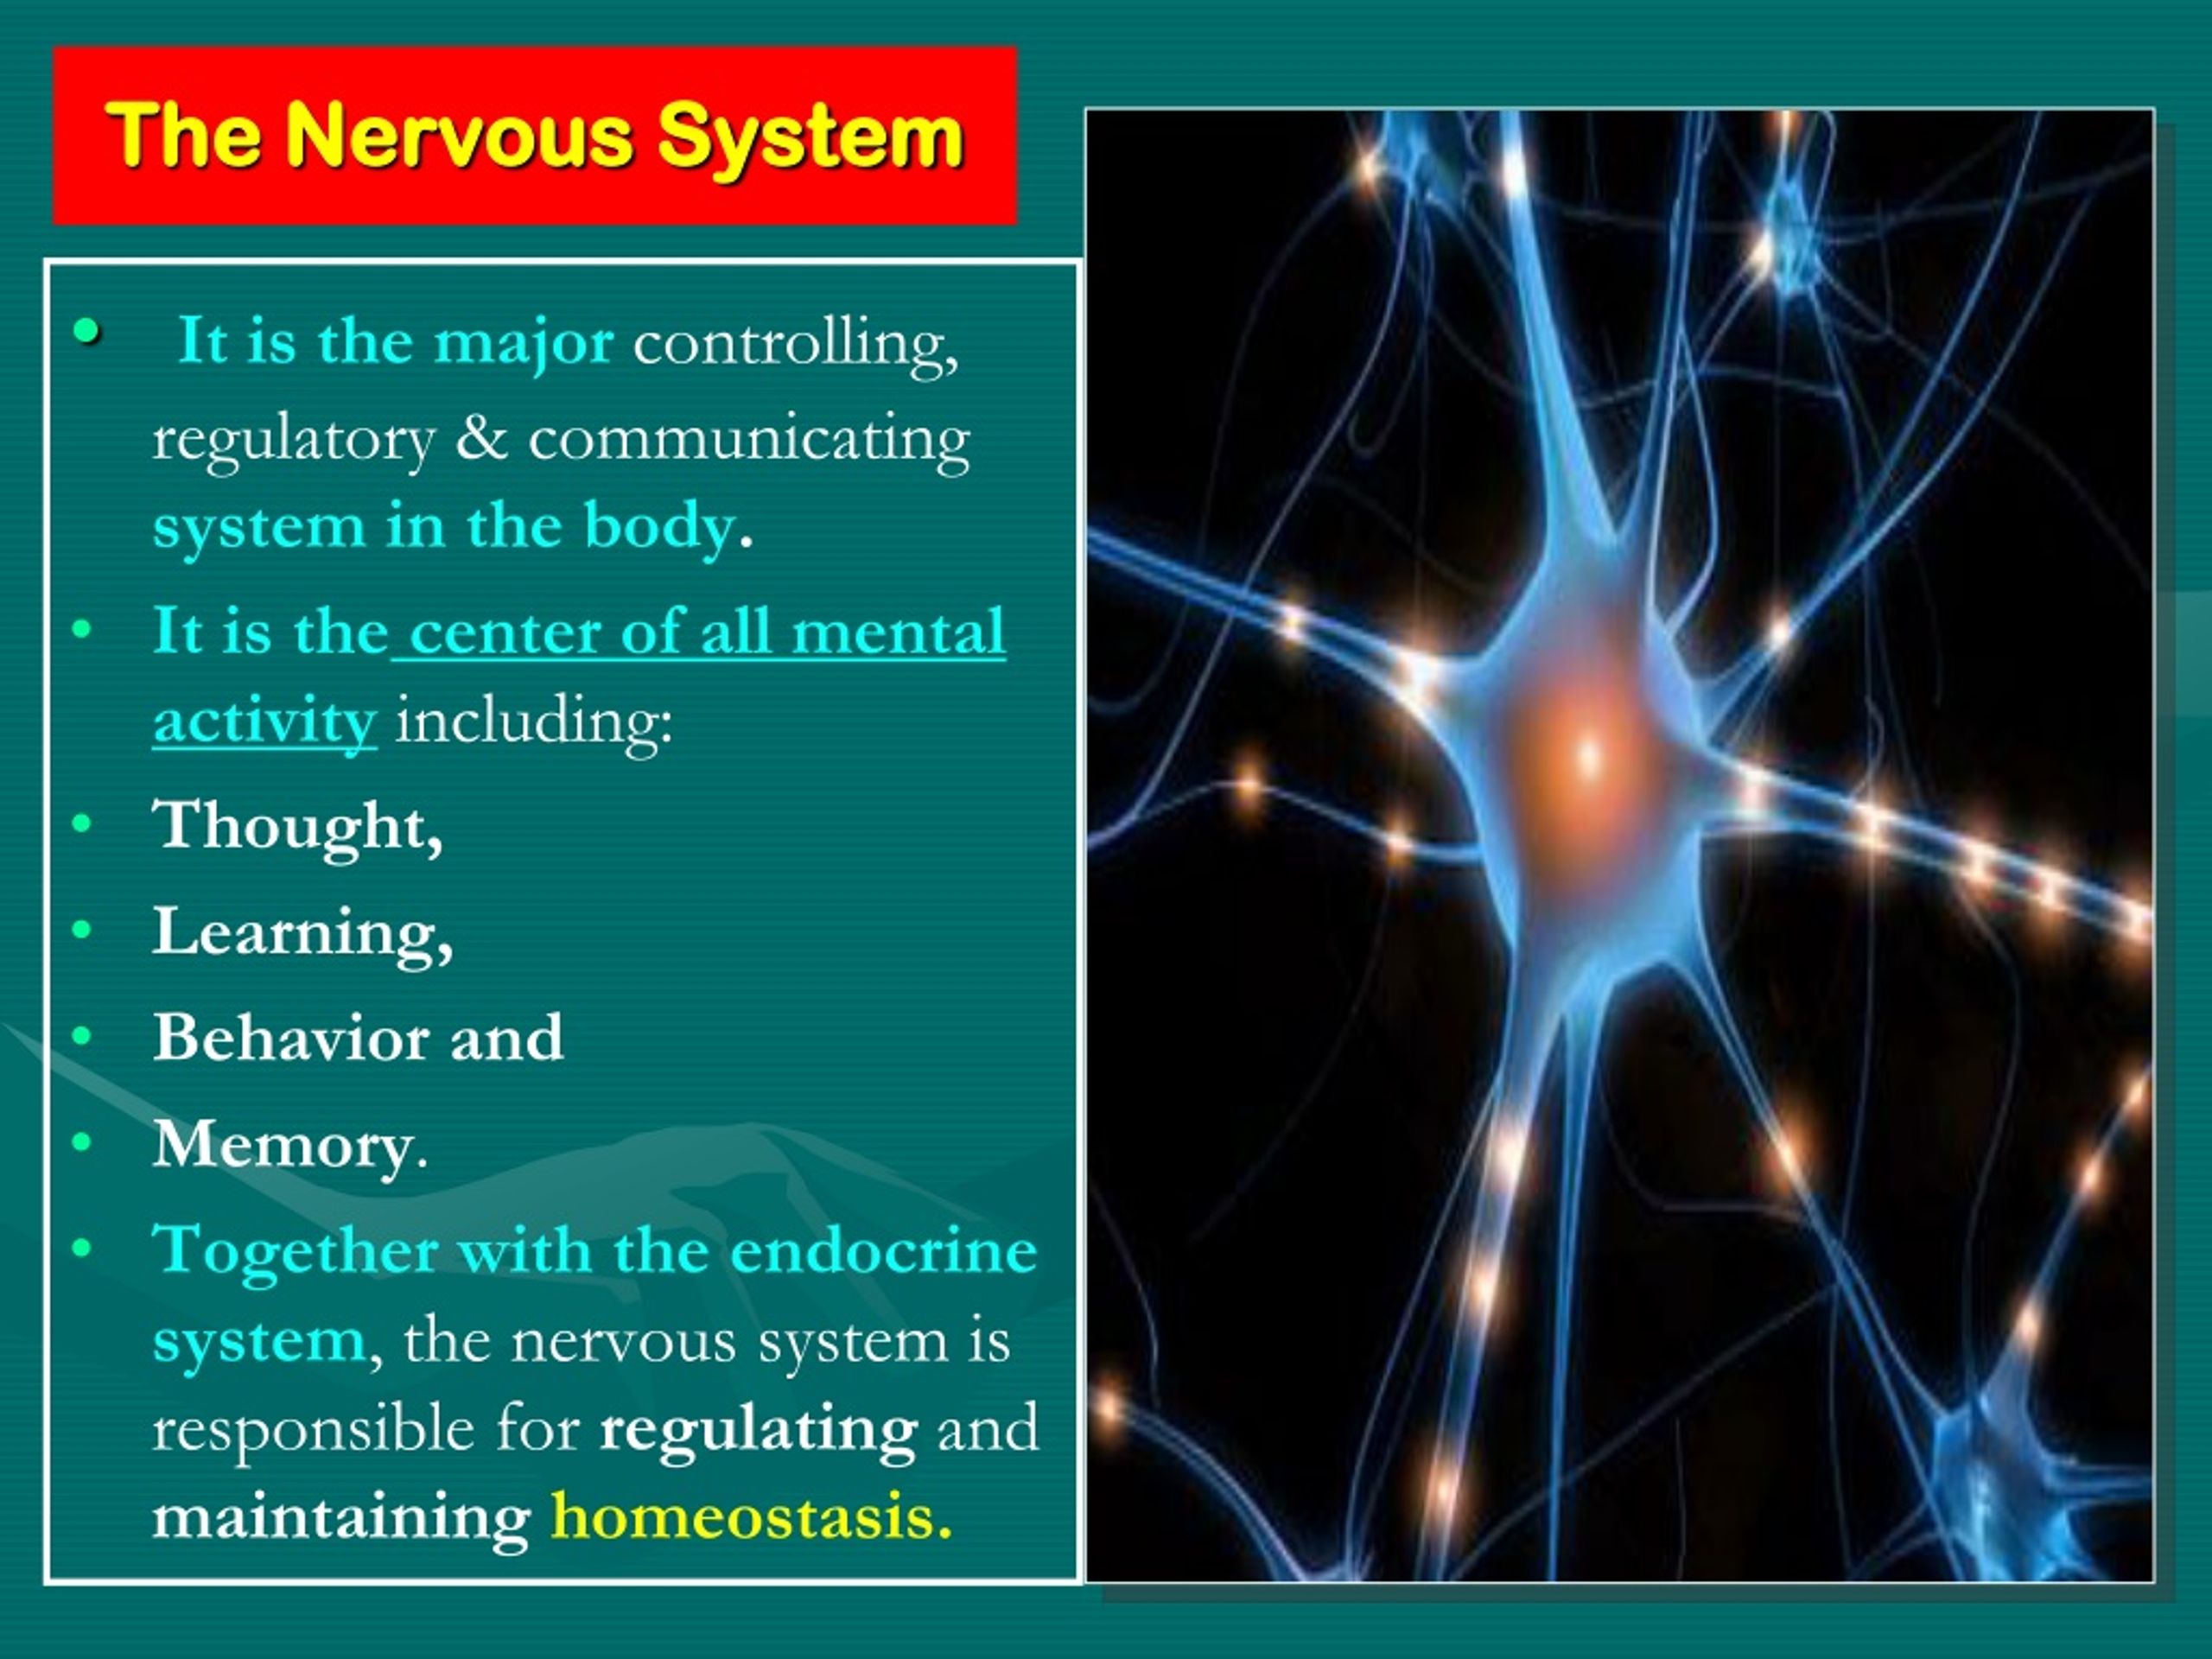 powerpoint presentation about nervous system